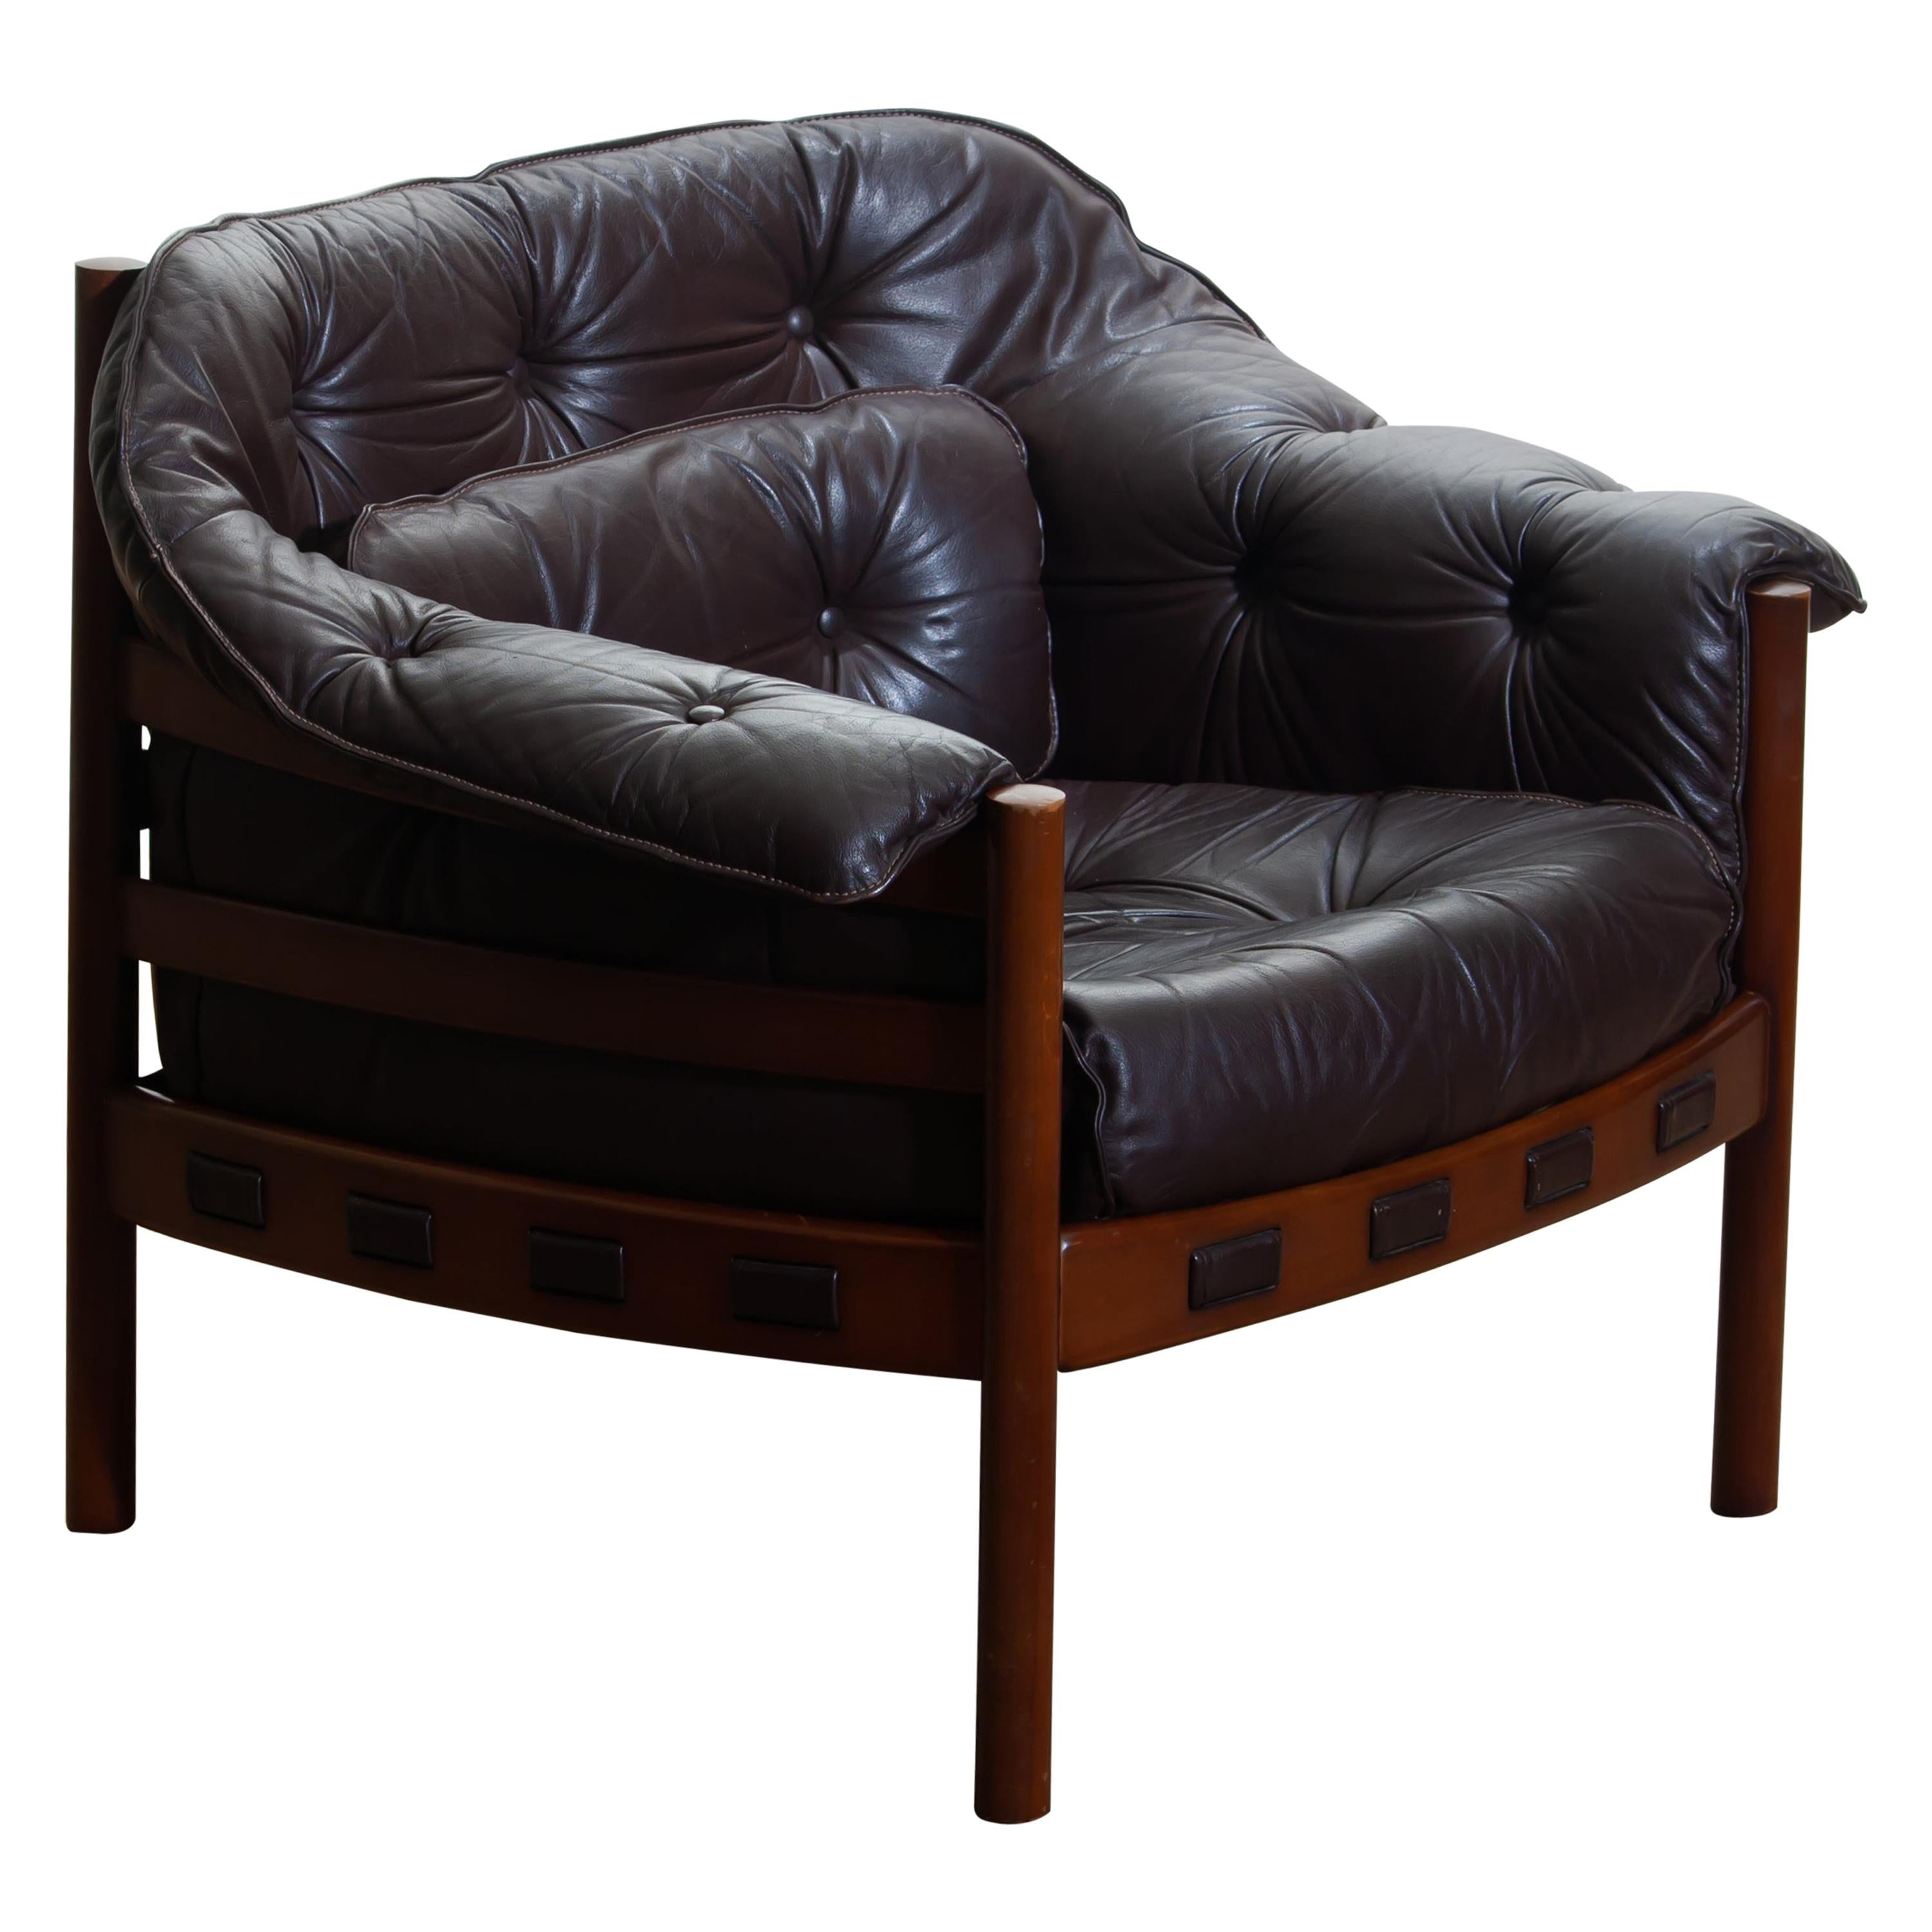 1960, Brown Leather Teak Lounge Chair by Arne Norell for Coja, Sweden In Good Condition In Silvolde, Gelderland